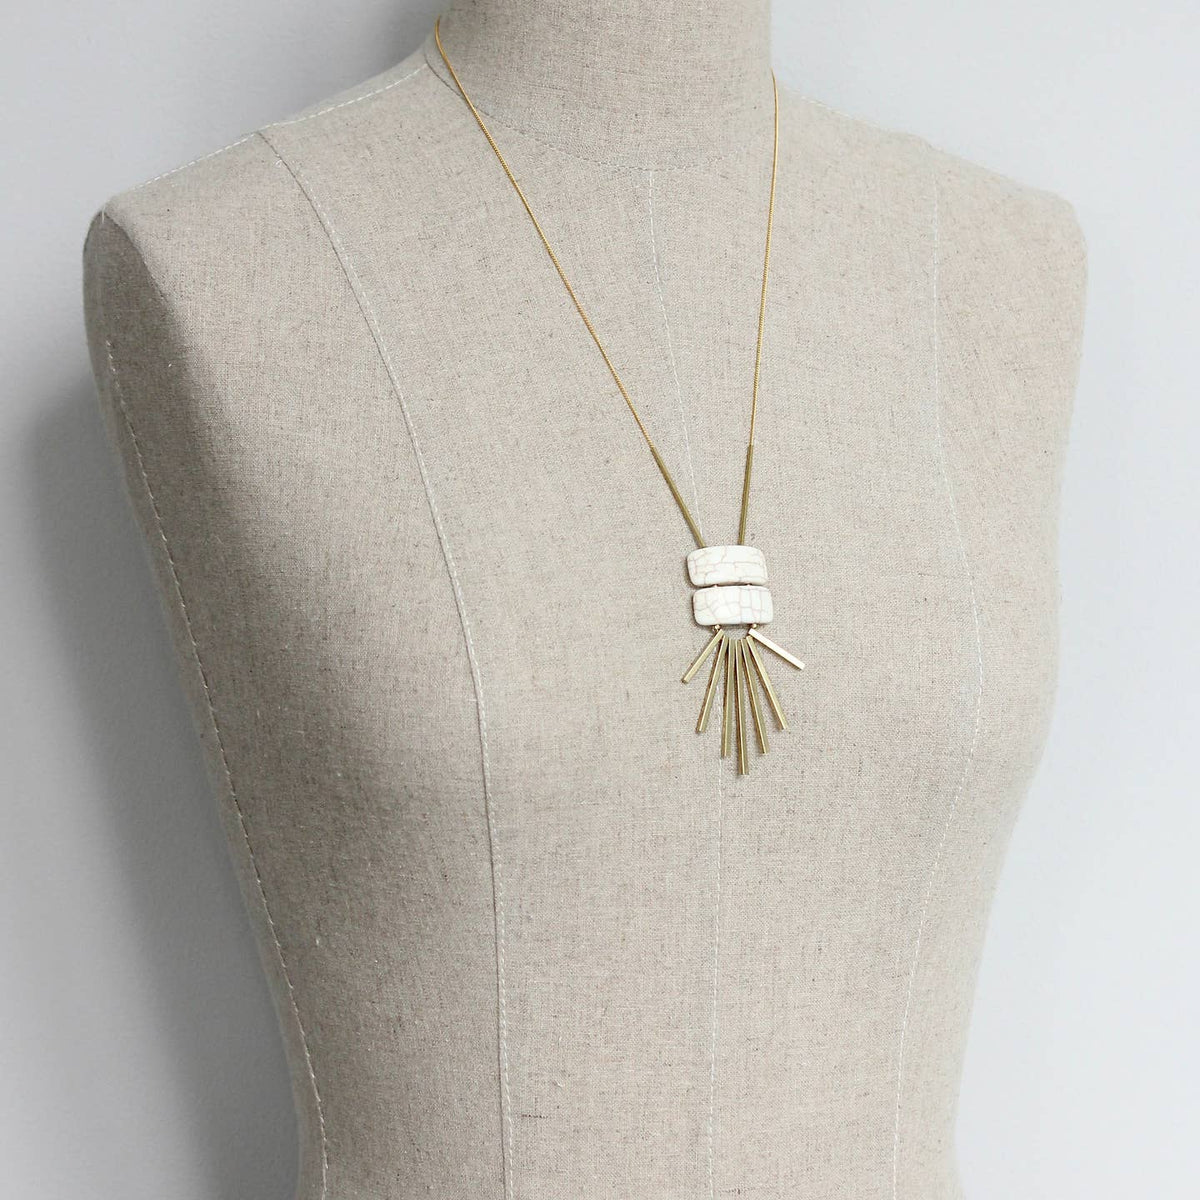 David Aubrey Fanned Magnesite and Brass Necklace